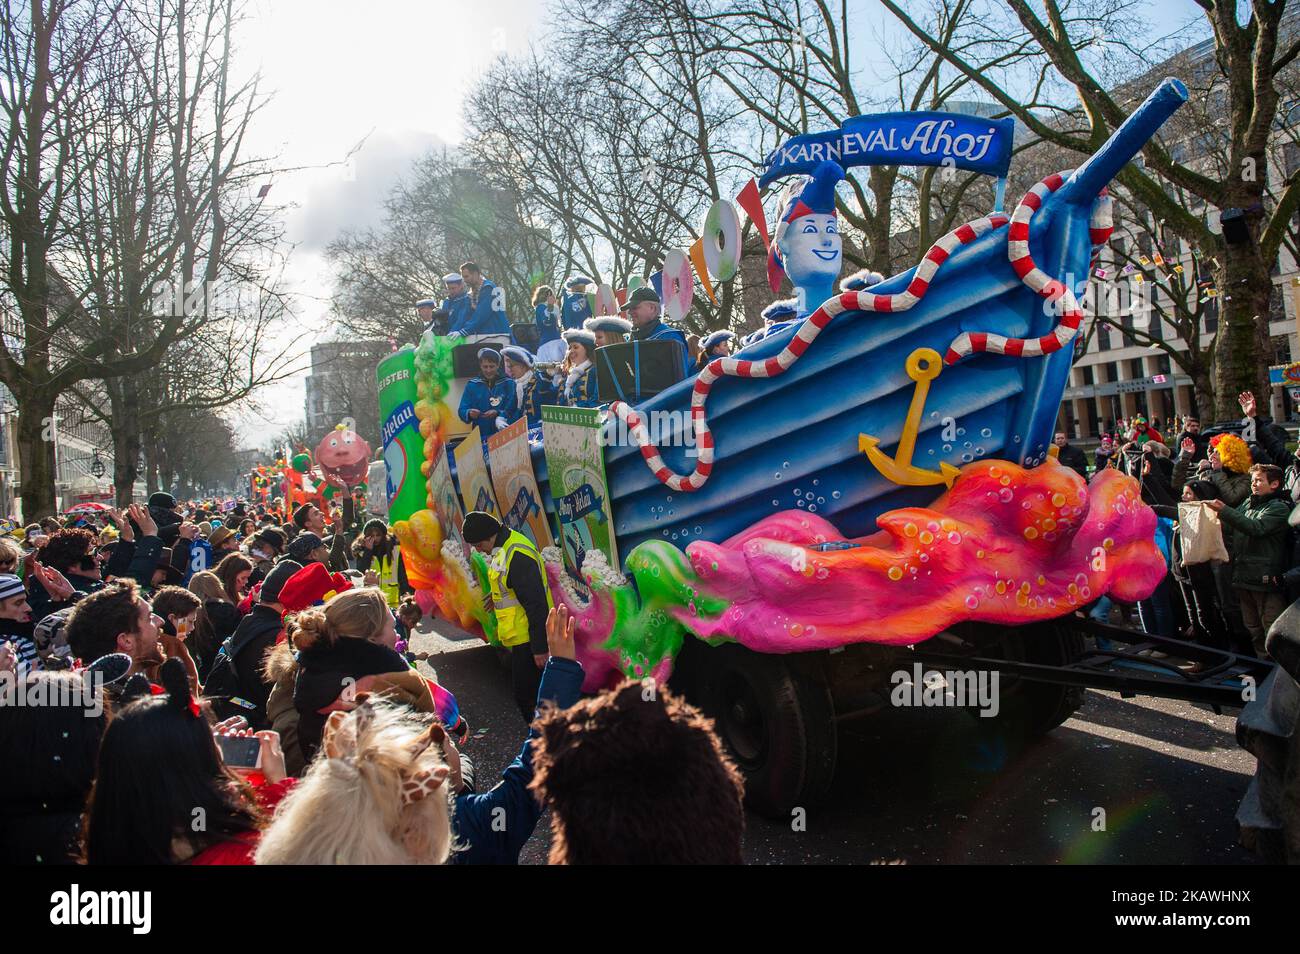 In Düsseldorf, Germany, on February 12th 2018, the calendar of Carnival events features no fewer than 300 Carnival shows, balls, anniversaries, receptions and costume parties. The motto this season is ‘Jeck erst recht’ (Carnival more than ever). The celebrations culminate in the Rose Monday Parade. More than 30 music ensembles and 5,000 participants join the procession through the city. Elaborately built and decorated floats address cultural and political issues and can be satirical, hilarious and even controversial. The politically themed floats of satirist Jacques Tilly are famous the world  Stock Photo